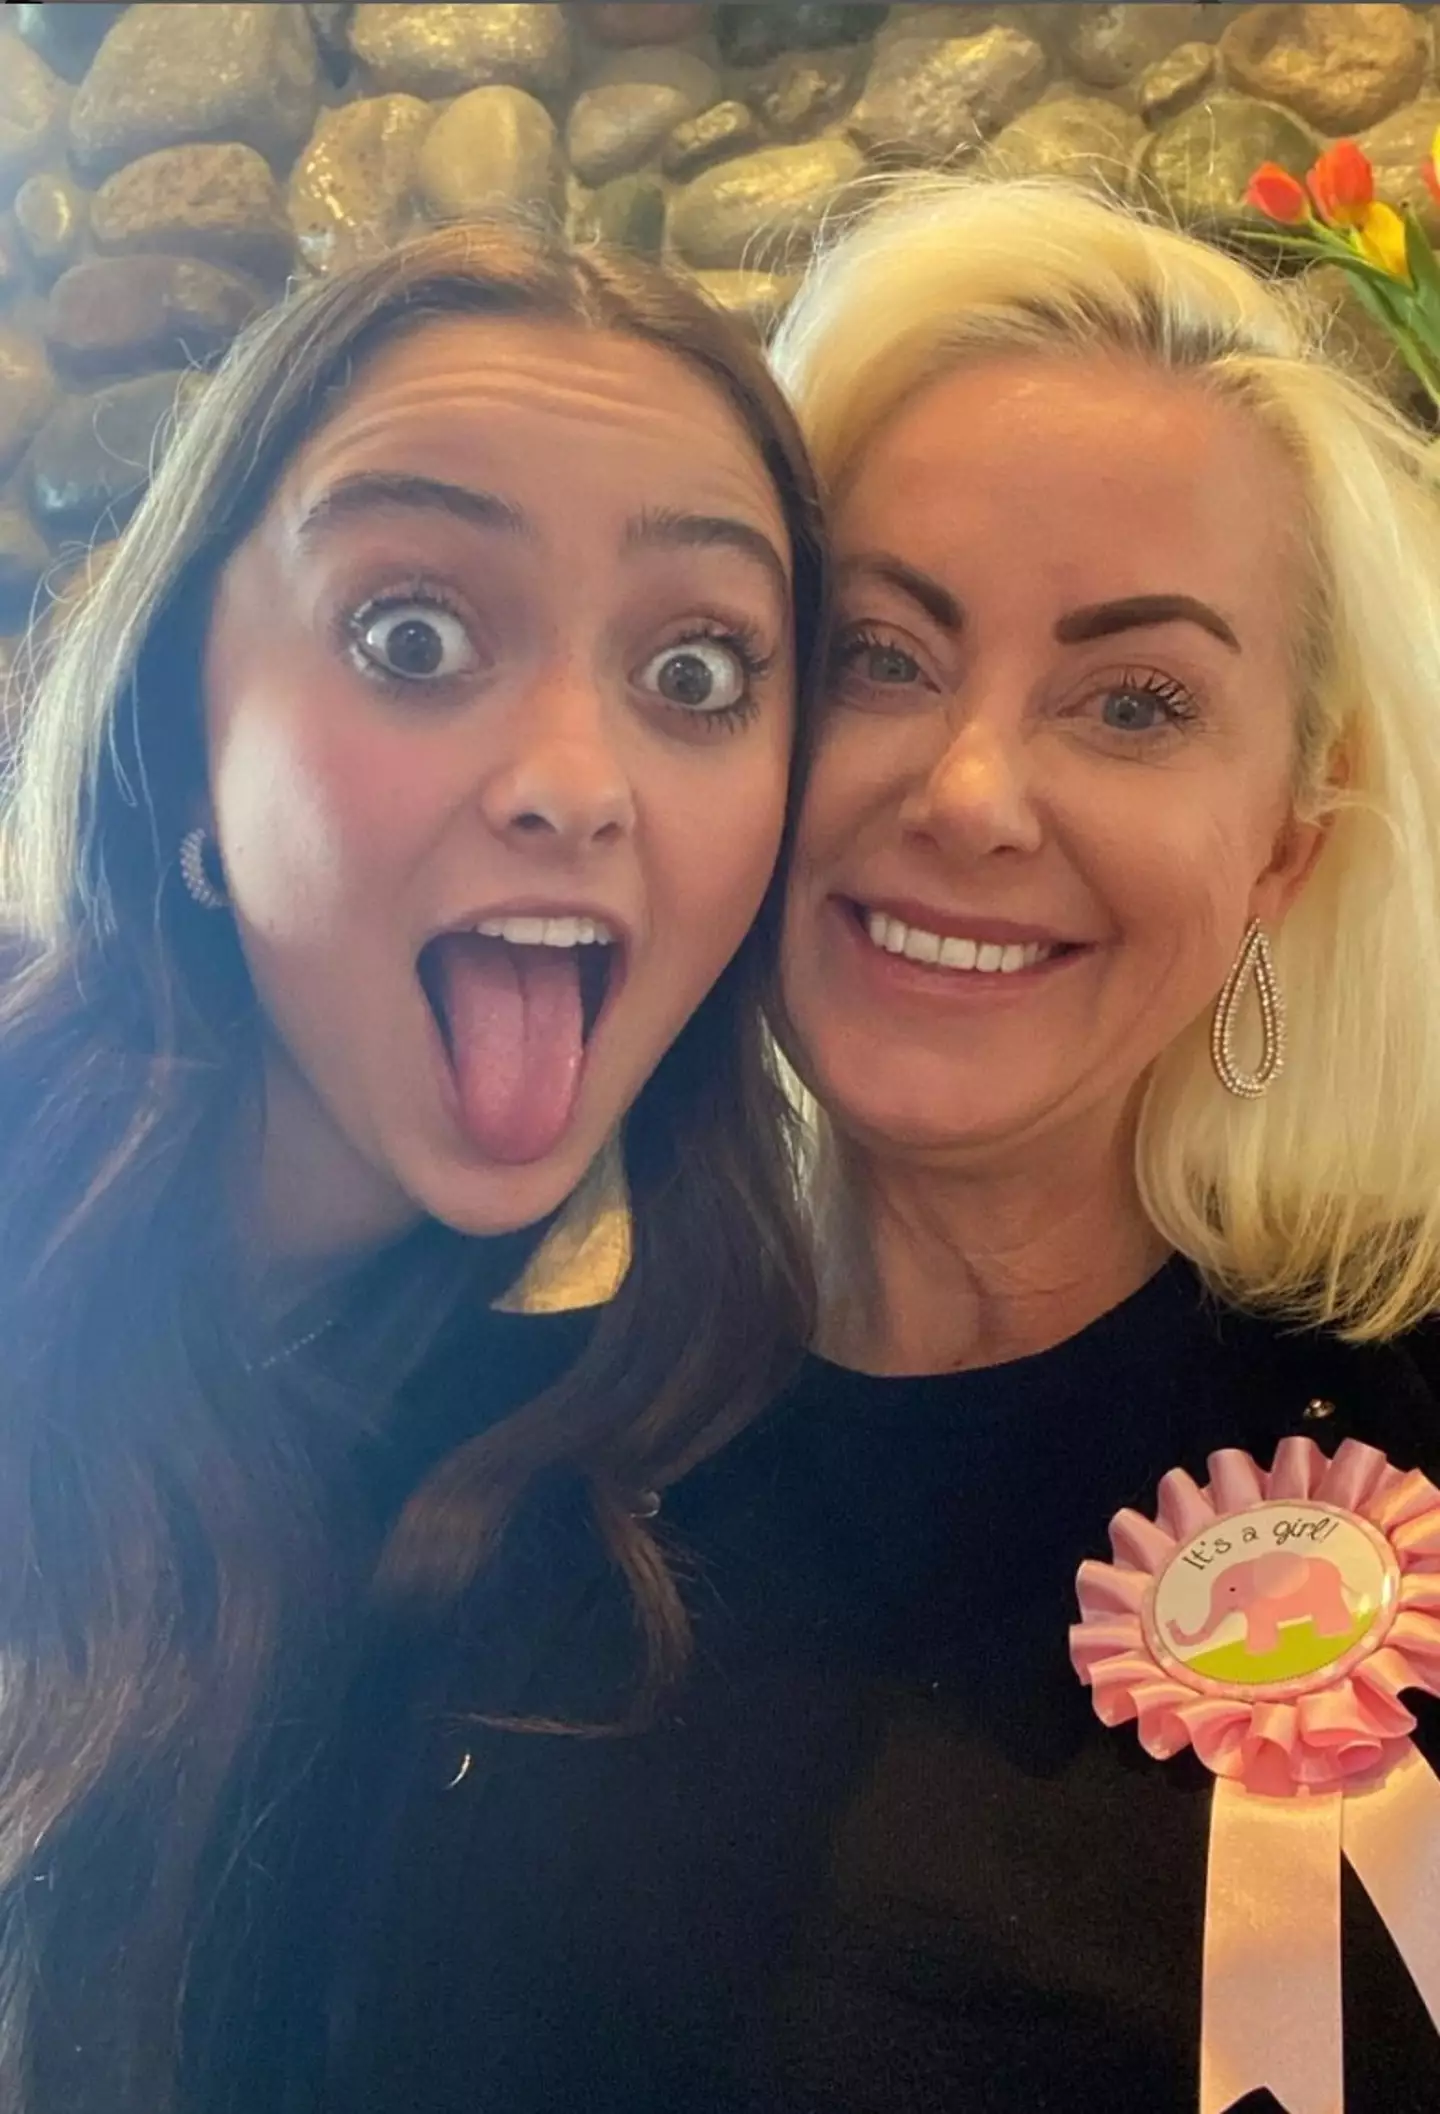 Kailia Posey’s mum has issued a heartbreaking statement following her daughter’s ‘suicide’ (Marcy Posey Instagram).